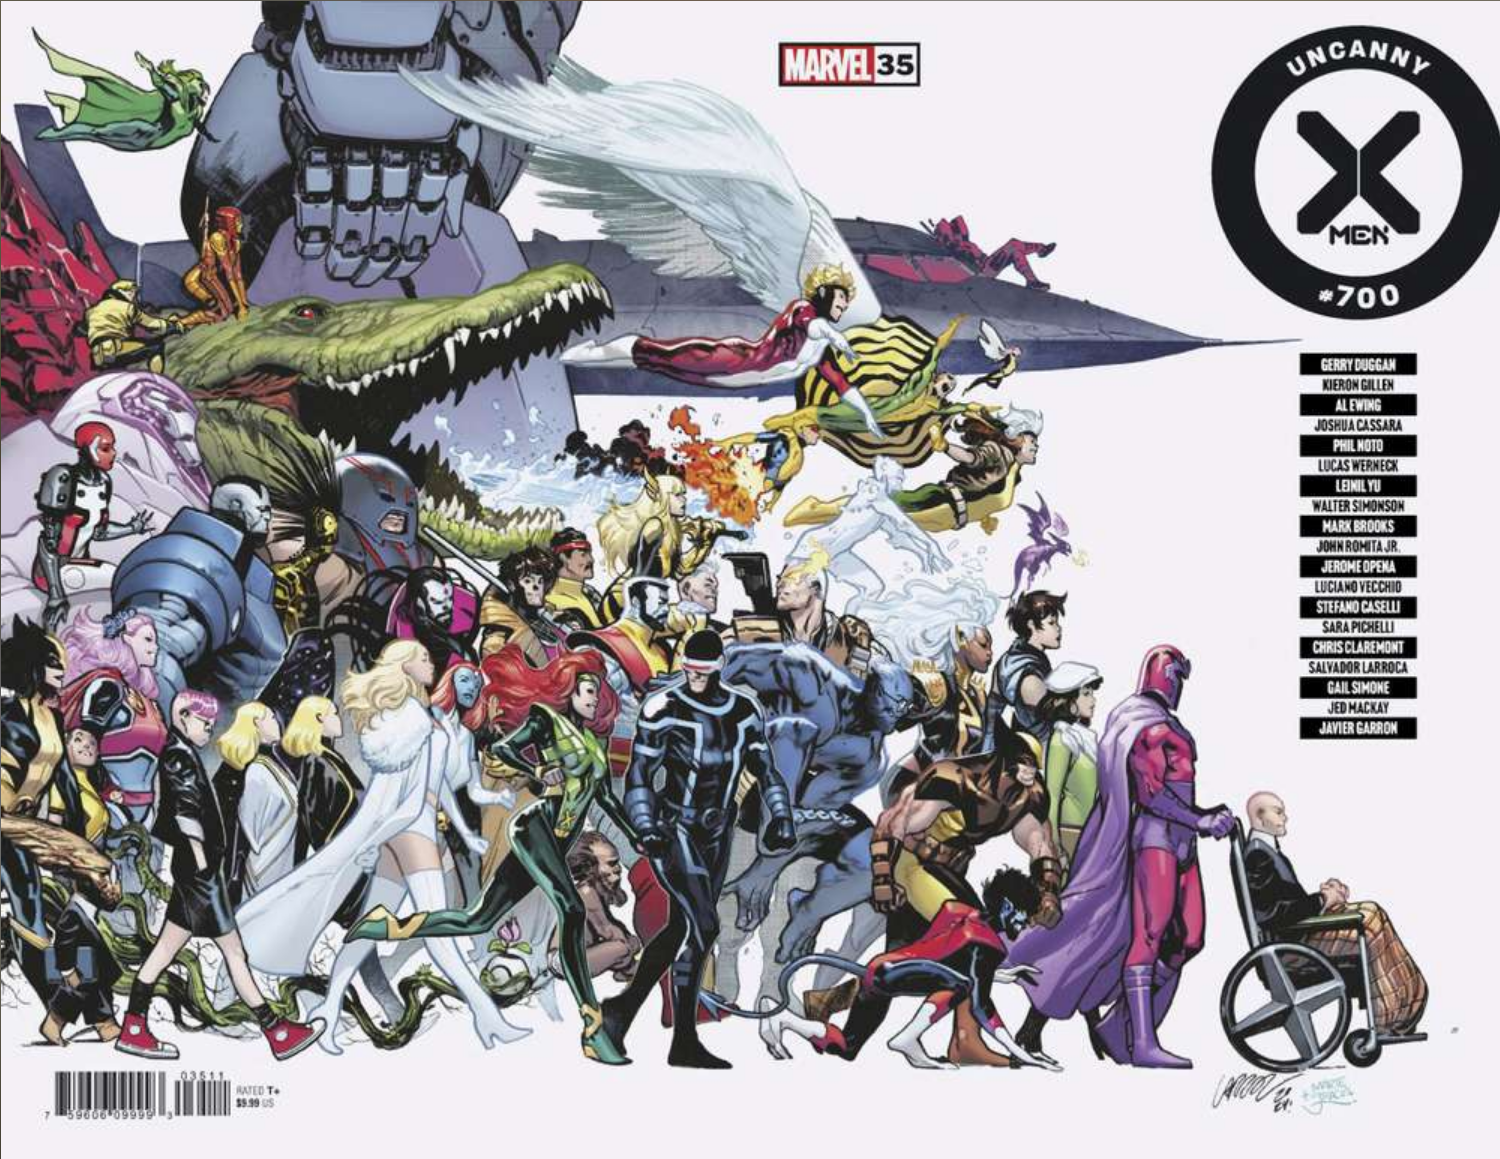 The wraparound cover to X-MEN #35 (Legacy issue #700) by Pepe Larraz, showing a cavalcade of X-characters marching across the page.